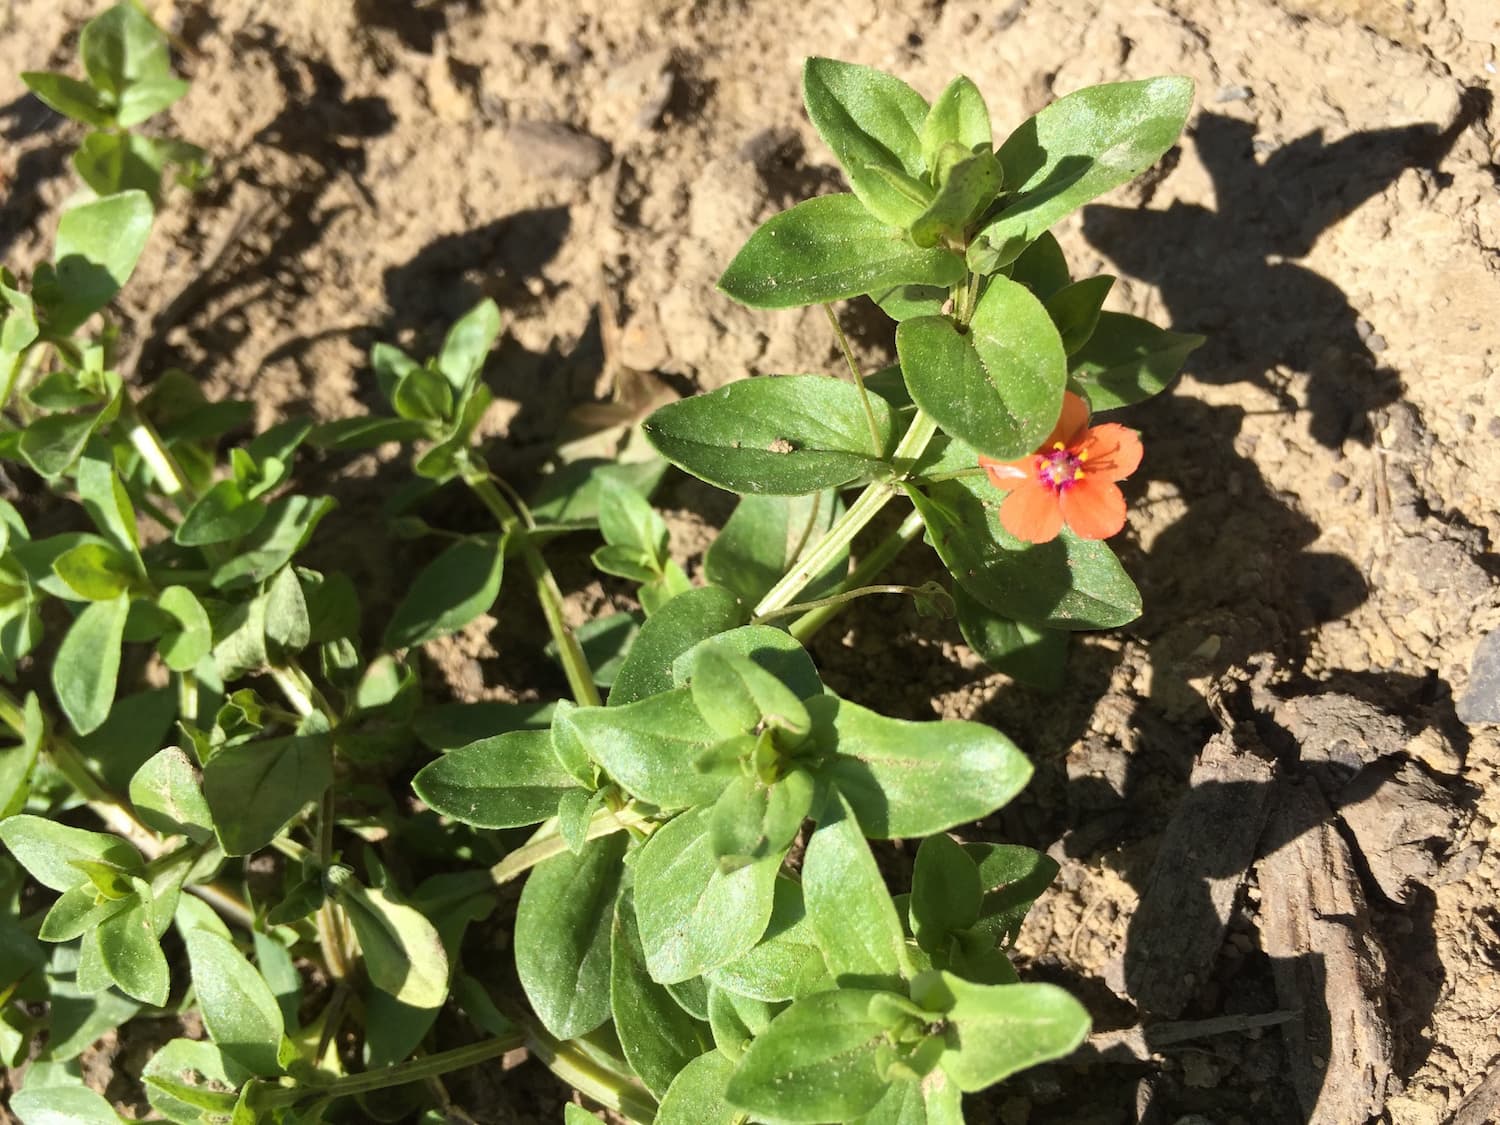 Scarlet pimpernel is toxic but easily distinguished from common chickweed thanks to its pink-orange flowers and lack of hairs.